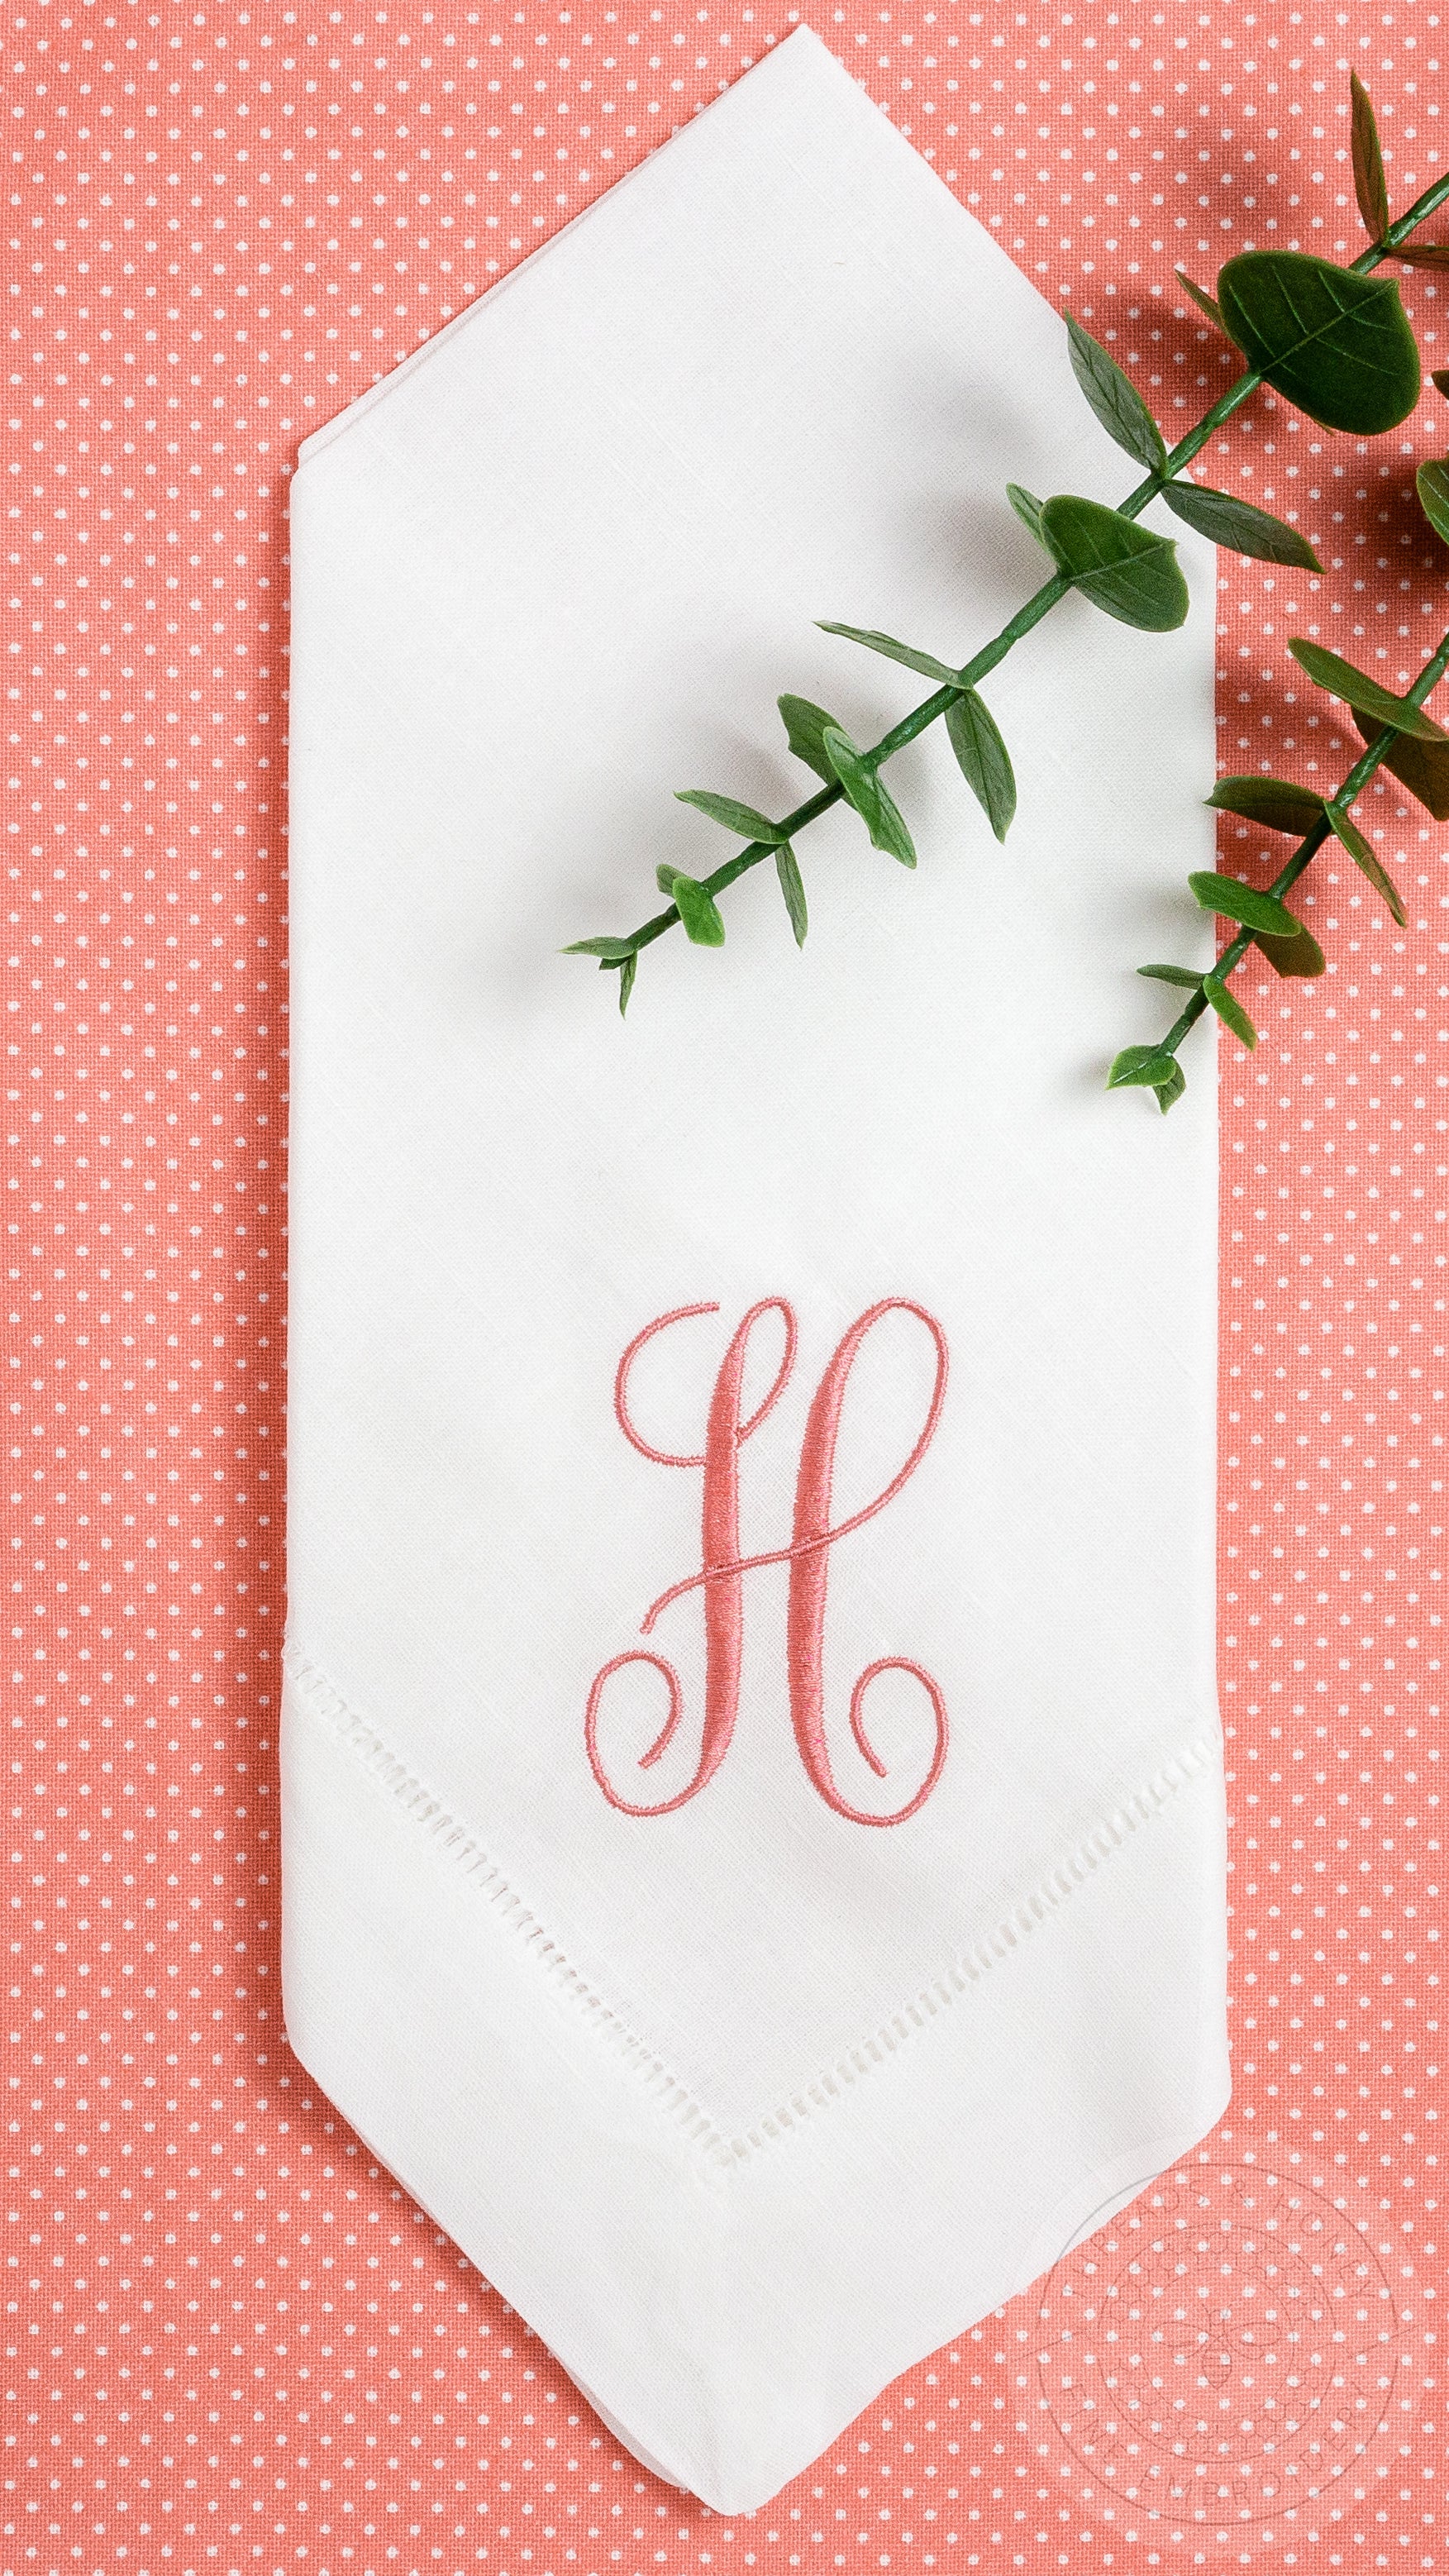 Embroidered Dinner Napkins with Calligraphy Single Letter Monogram